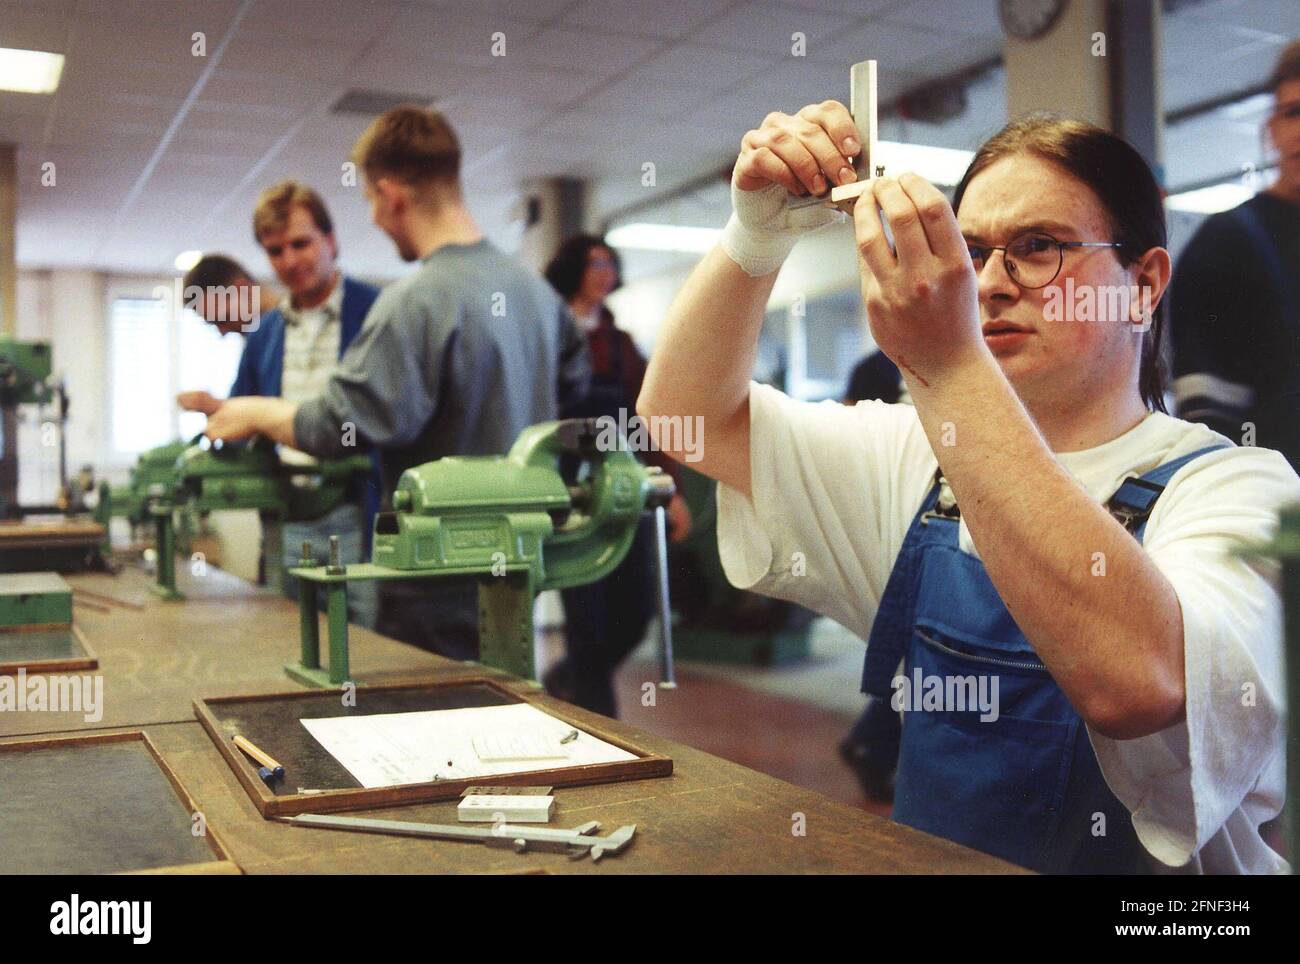 New training occupation: mechatronics technician. From September 98, trainees can learn the profession of mechatronics technician as a mixture between electronics technician and mechanic.nHere: Mechatronics technician training at the Osram plant in Berlin. [automated translation] Stock Photo